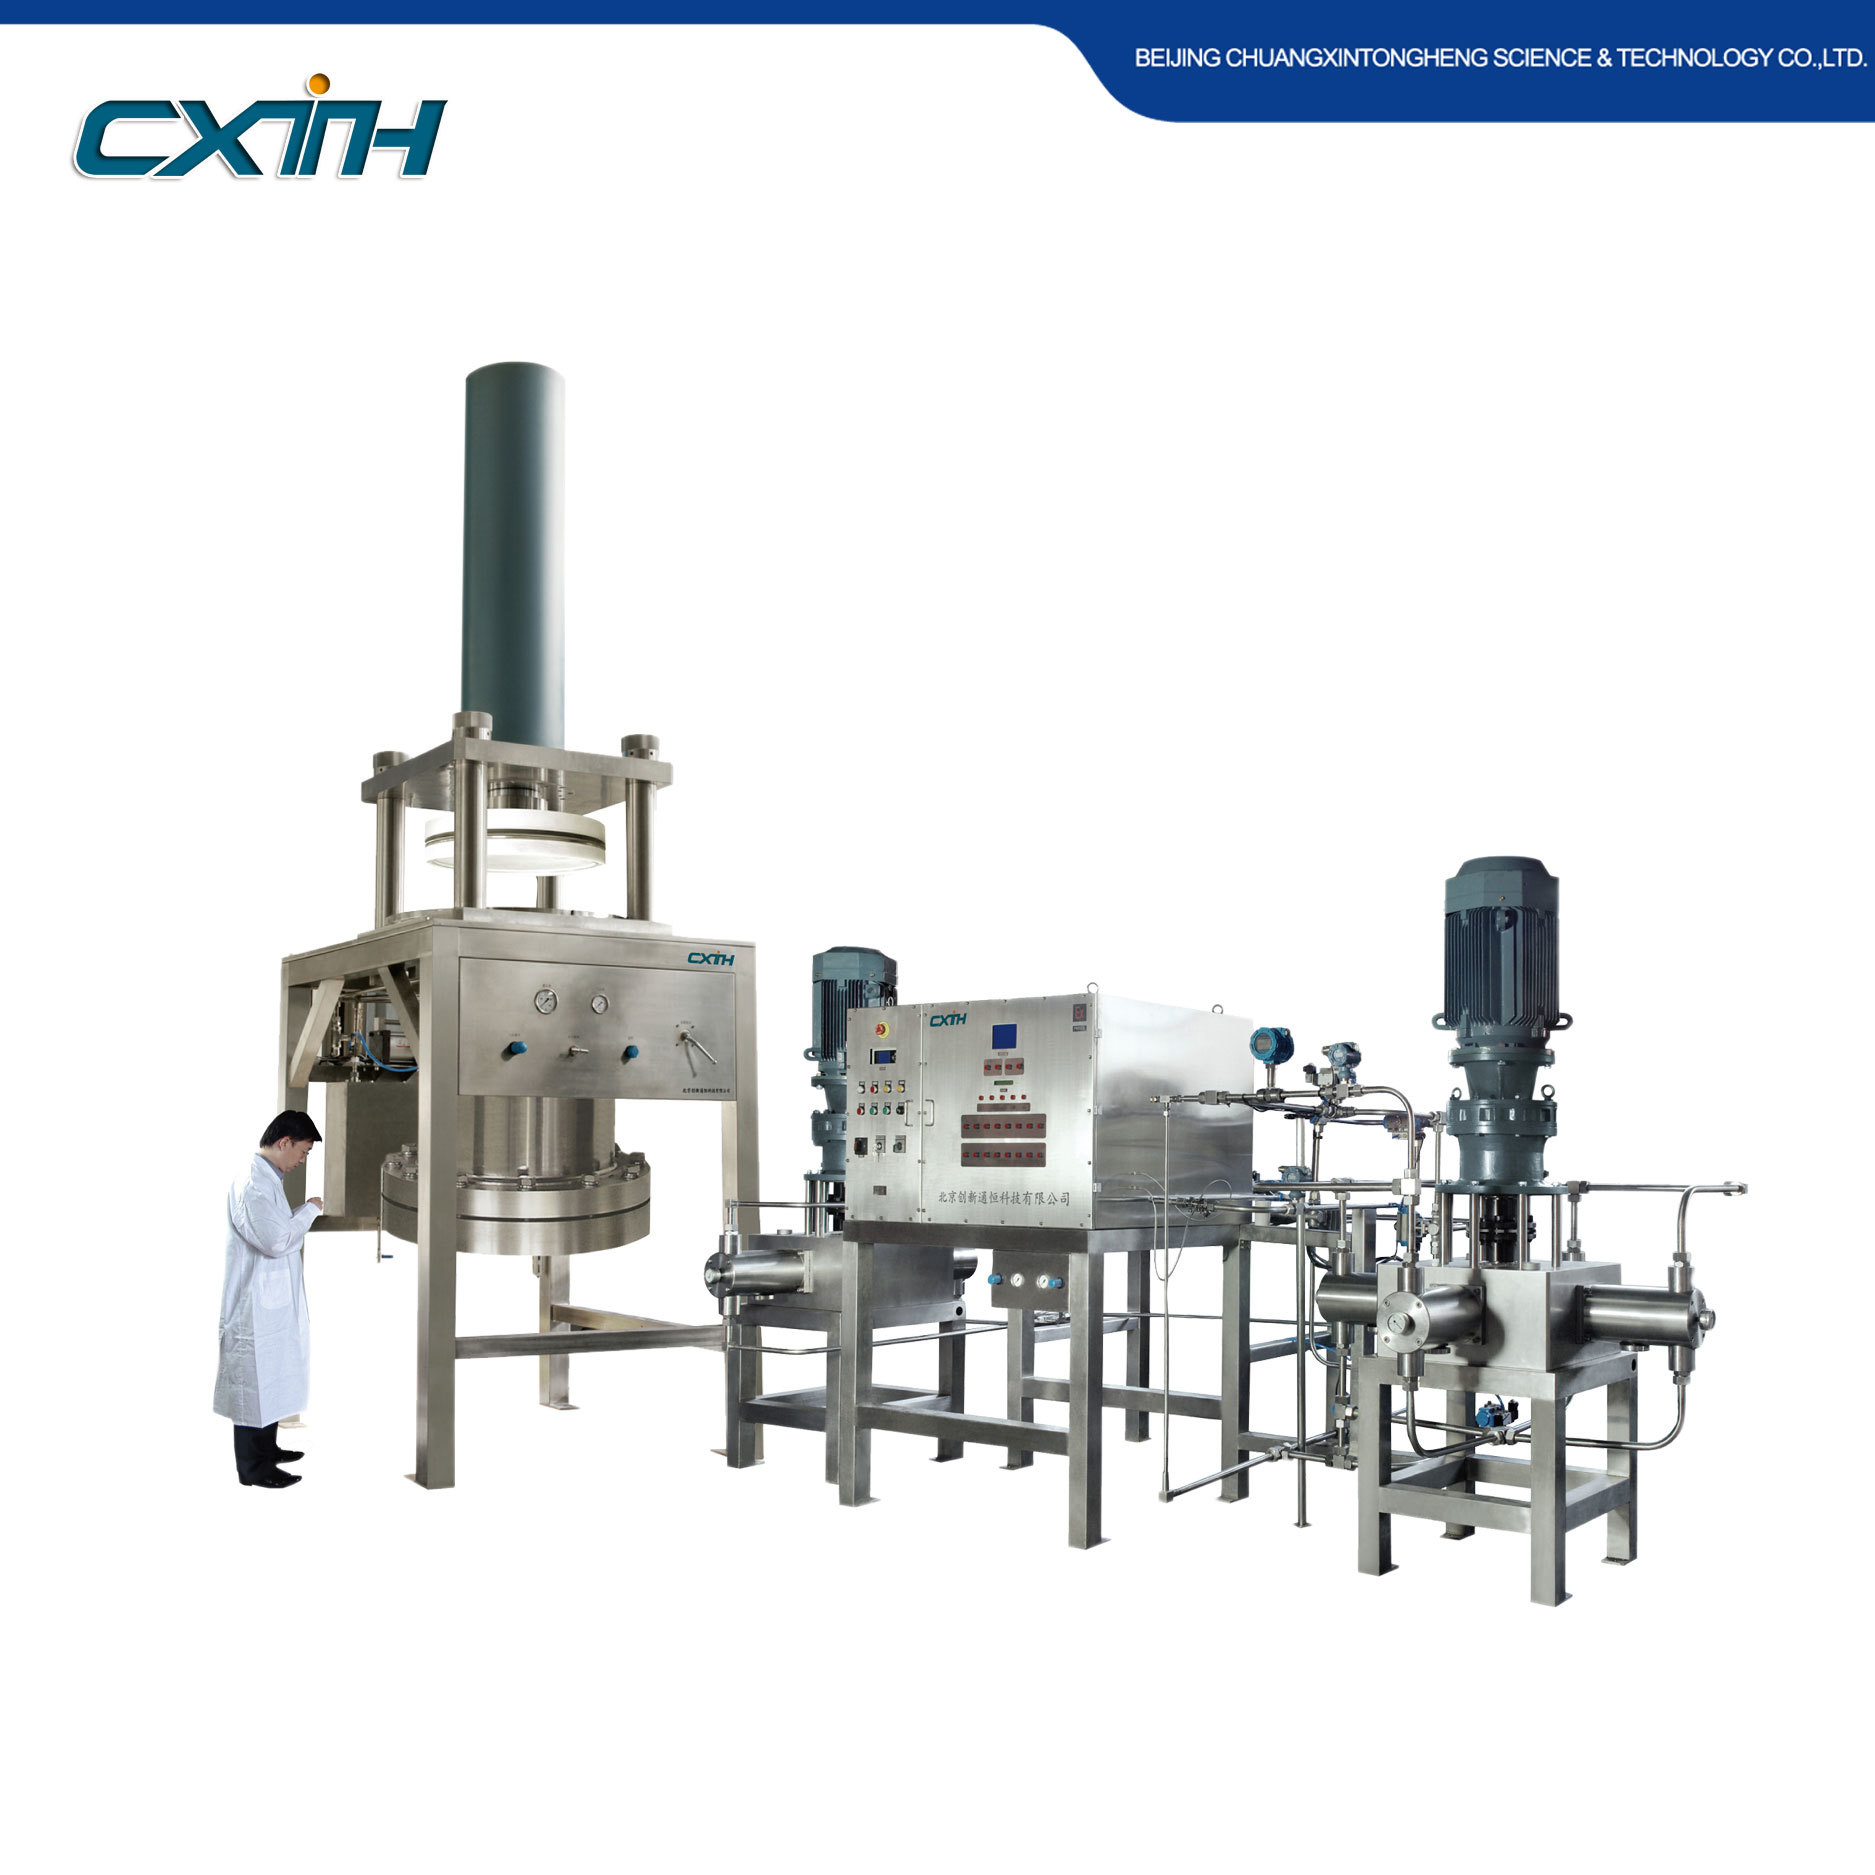 The first generation of industrialized preparative liquid chromatography system